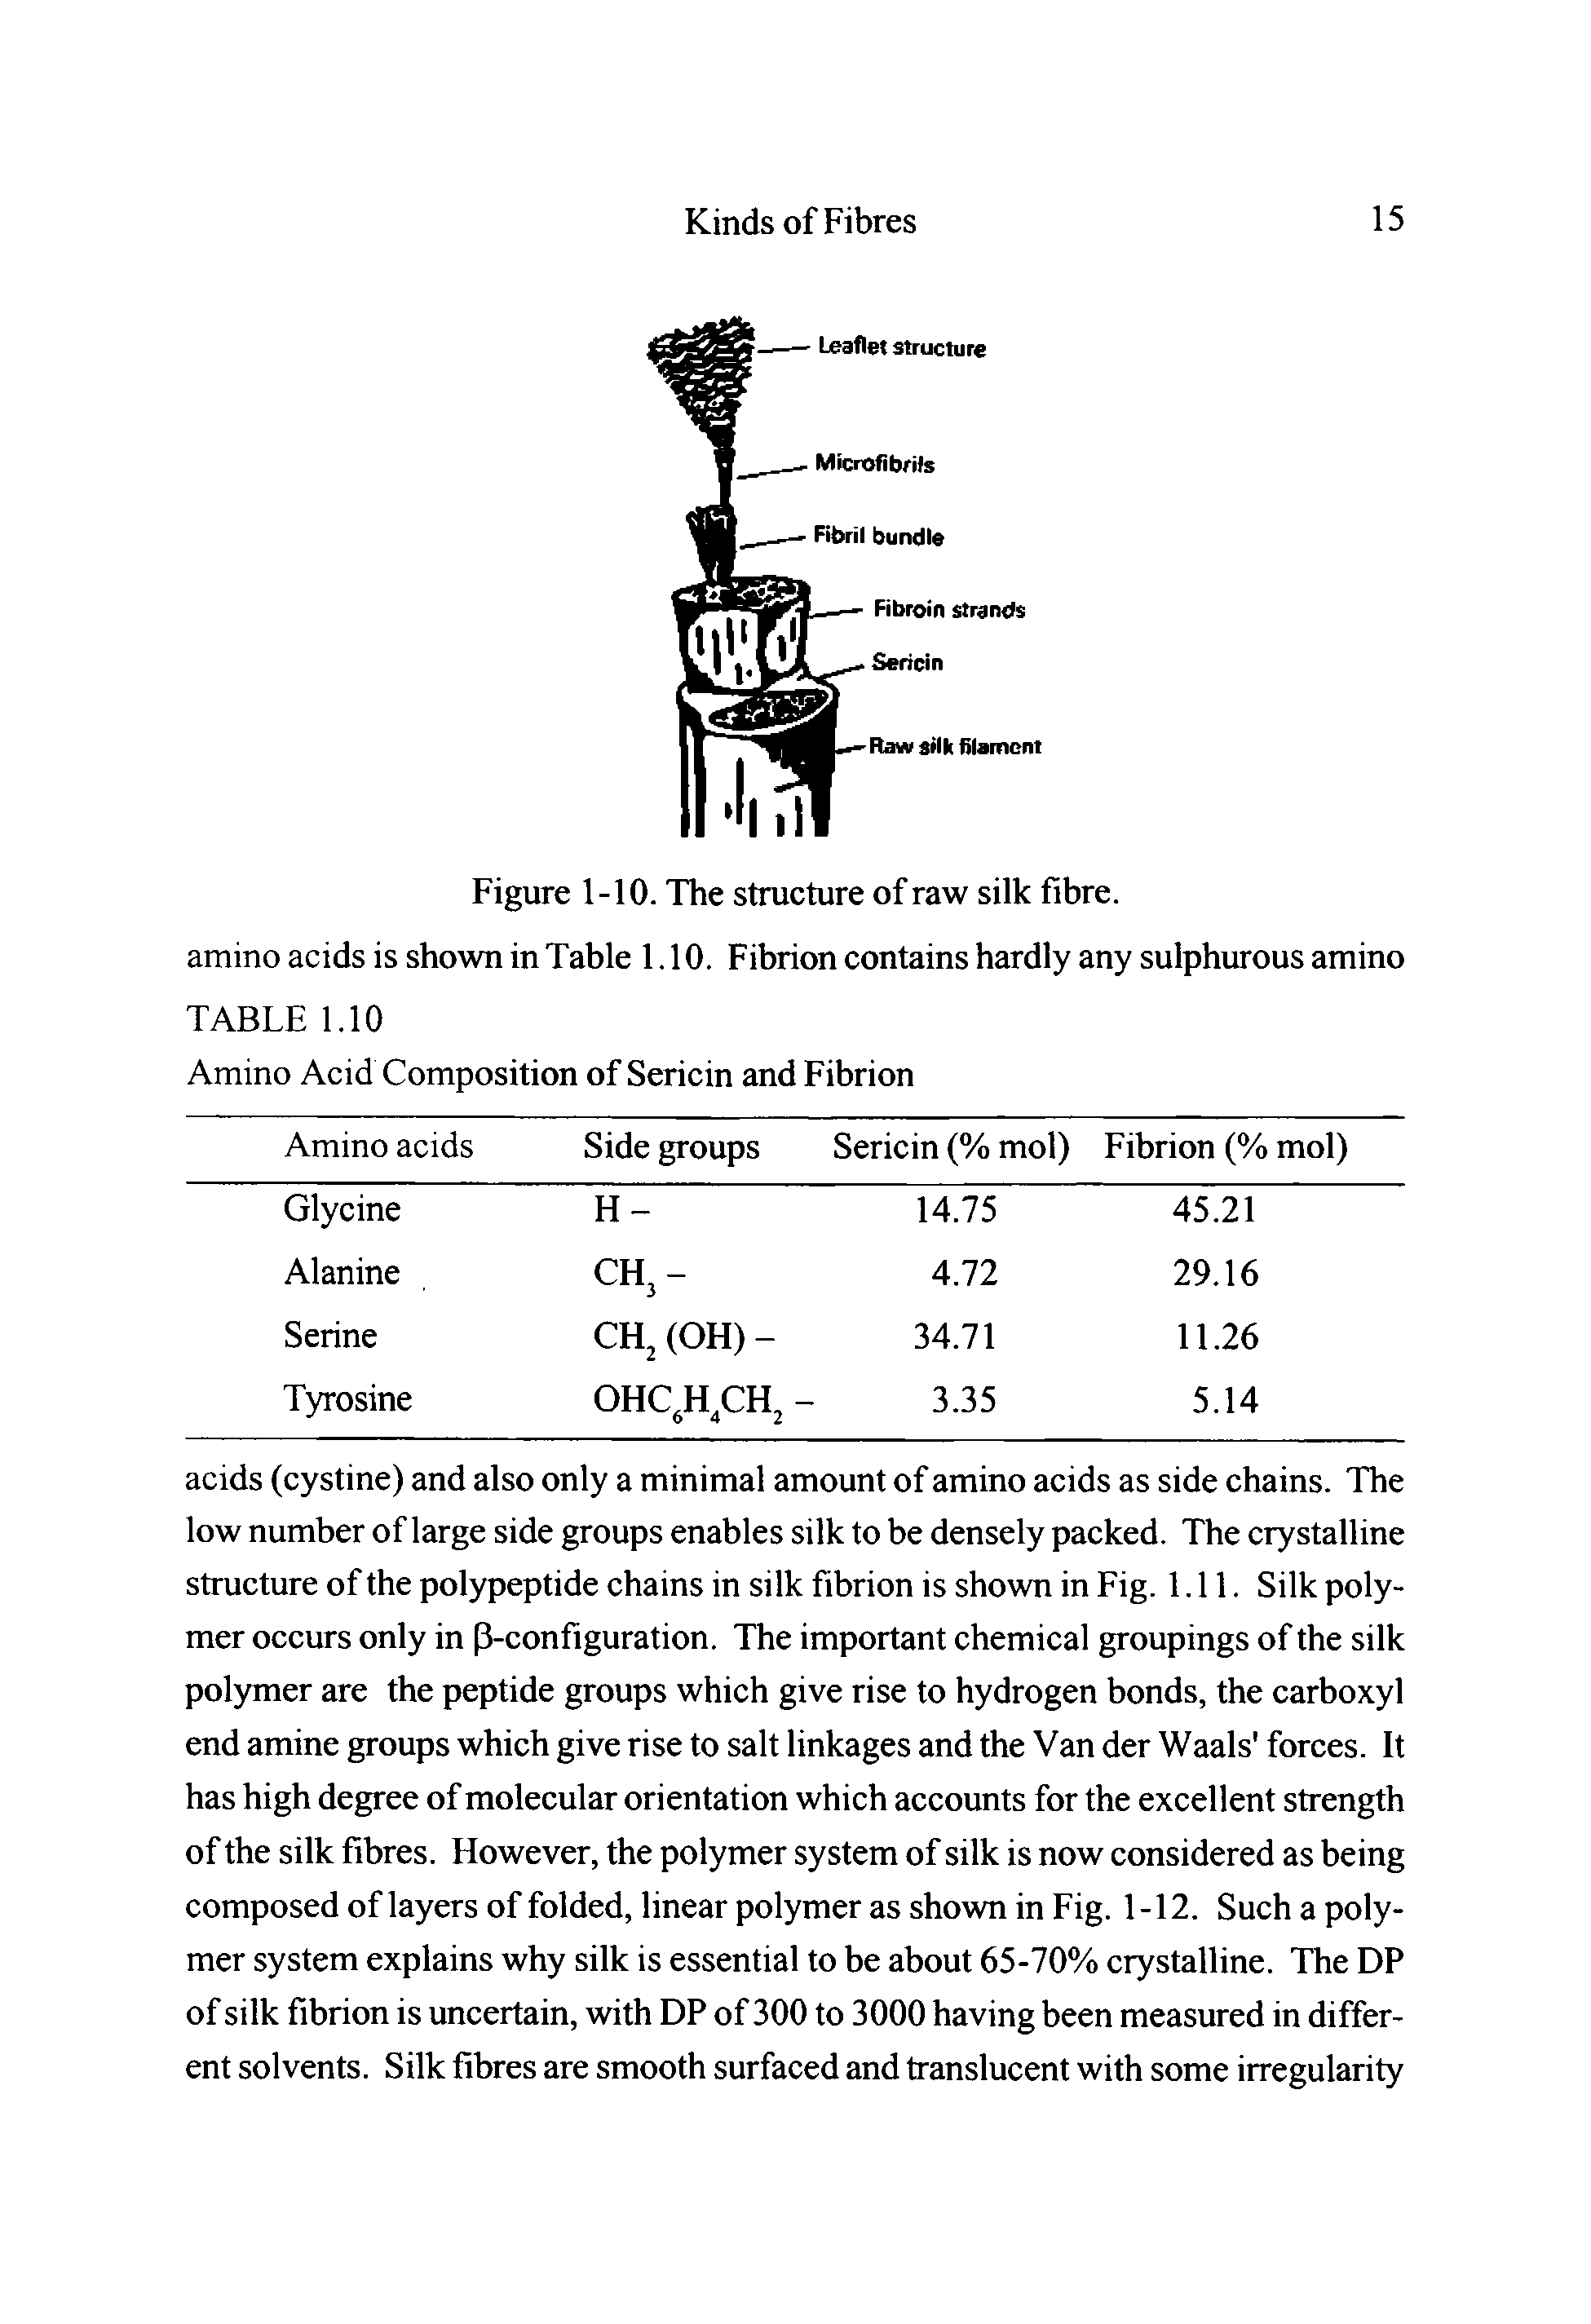 Figure 1-10. The structure of raw silk fibre, amino acids is shown in Table 1.10. Fibrion contains hardly any sulphurous amino TABLE 1.10...